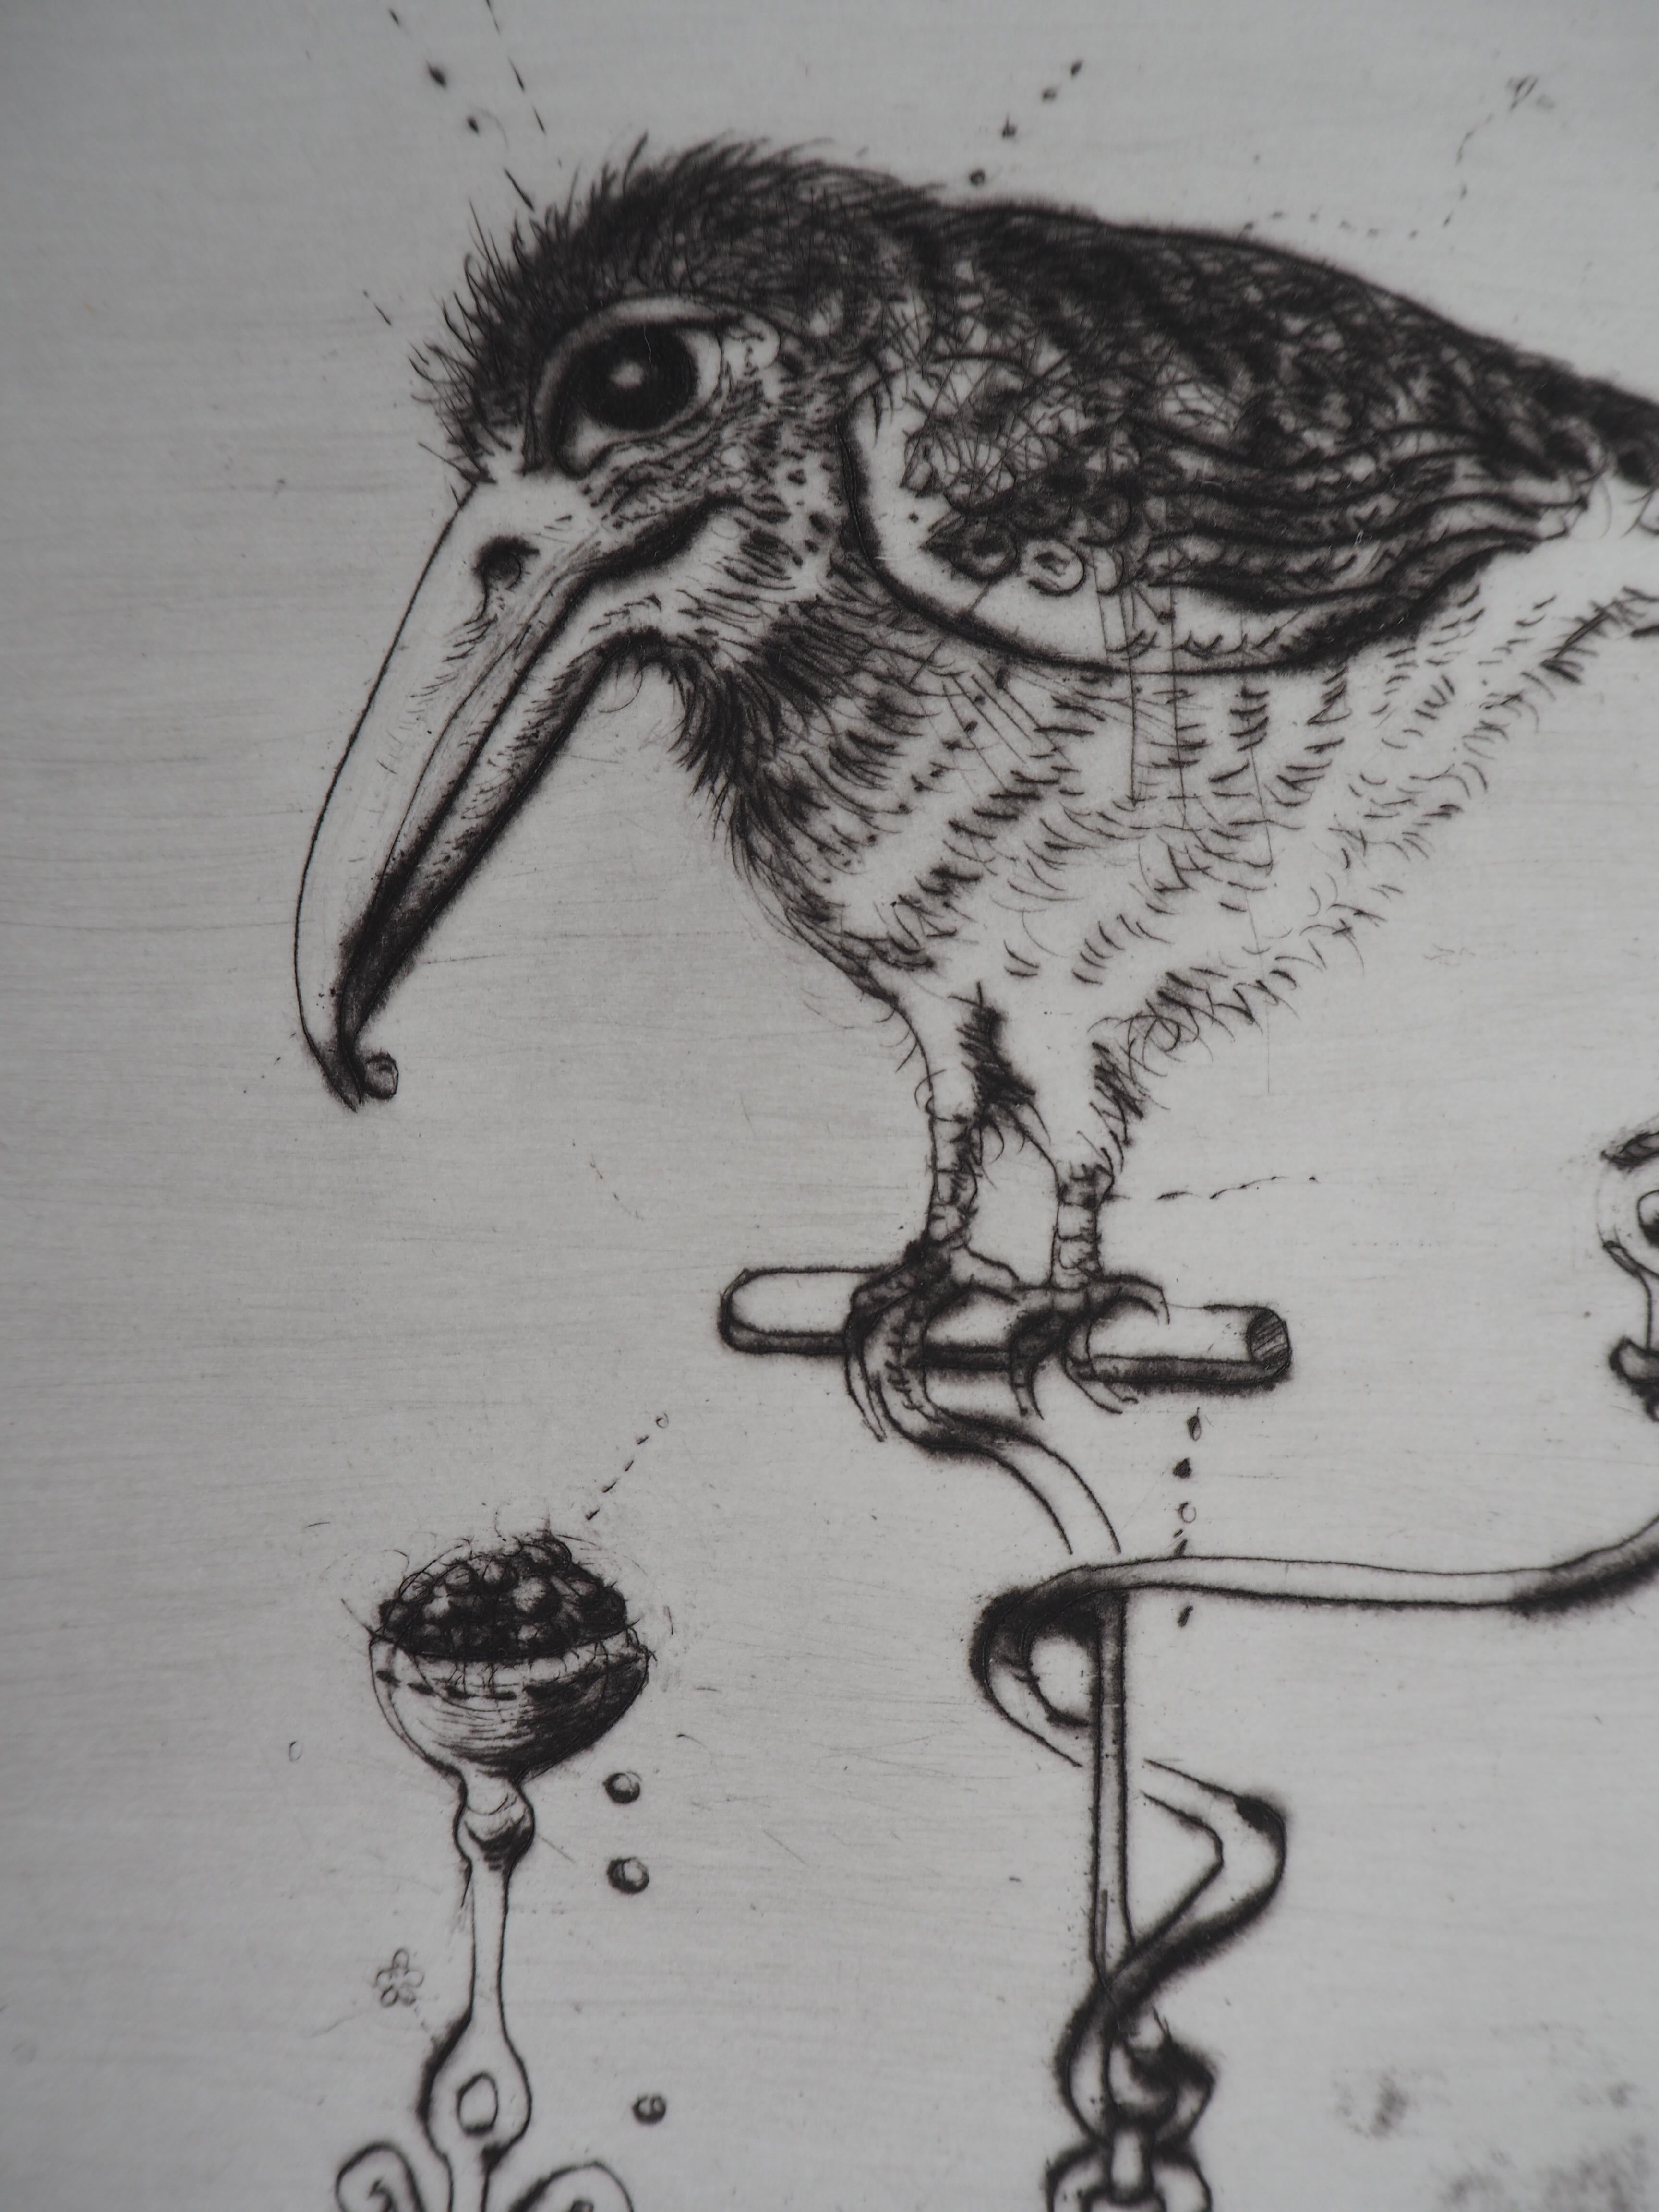 The Little Bird - Etching, Ltd 75 copies - Gray Animal Print by Mordecai Moreh